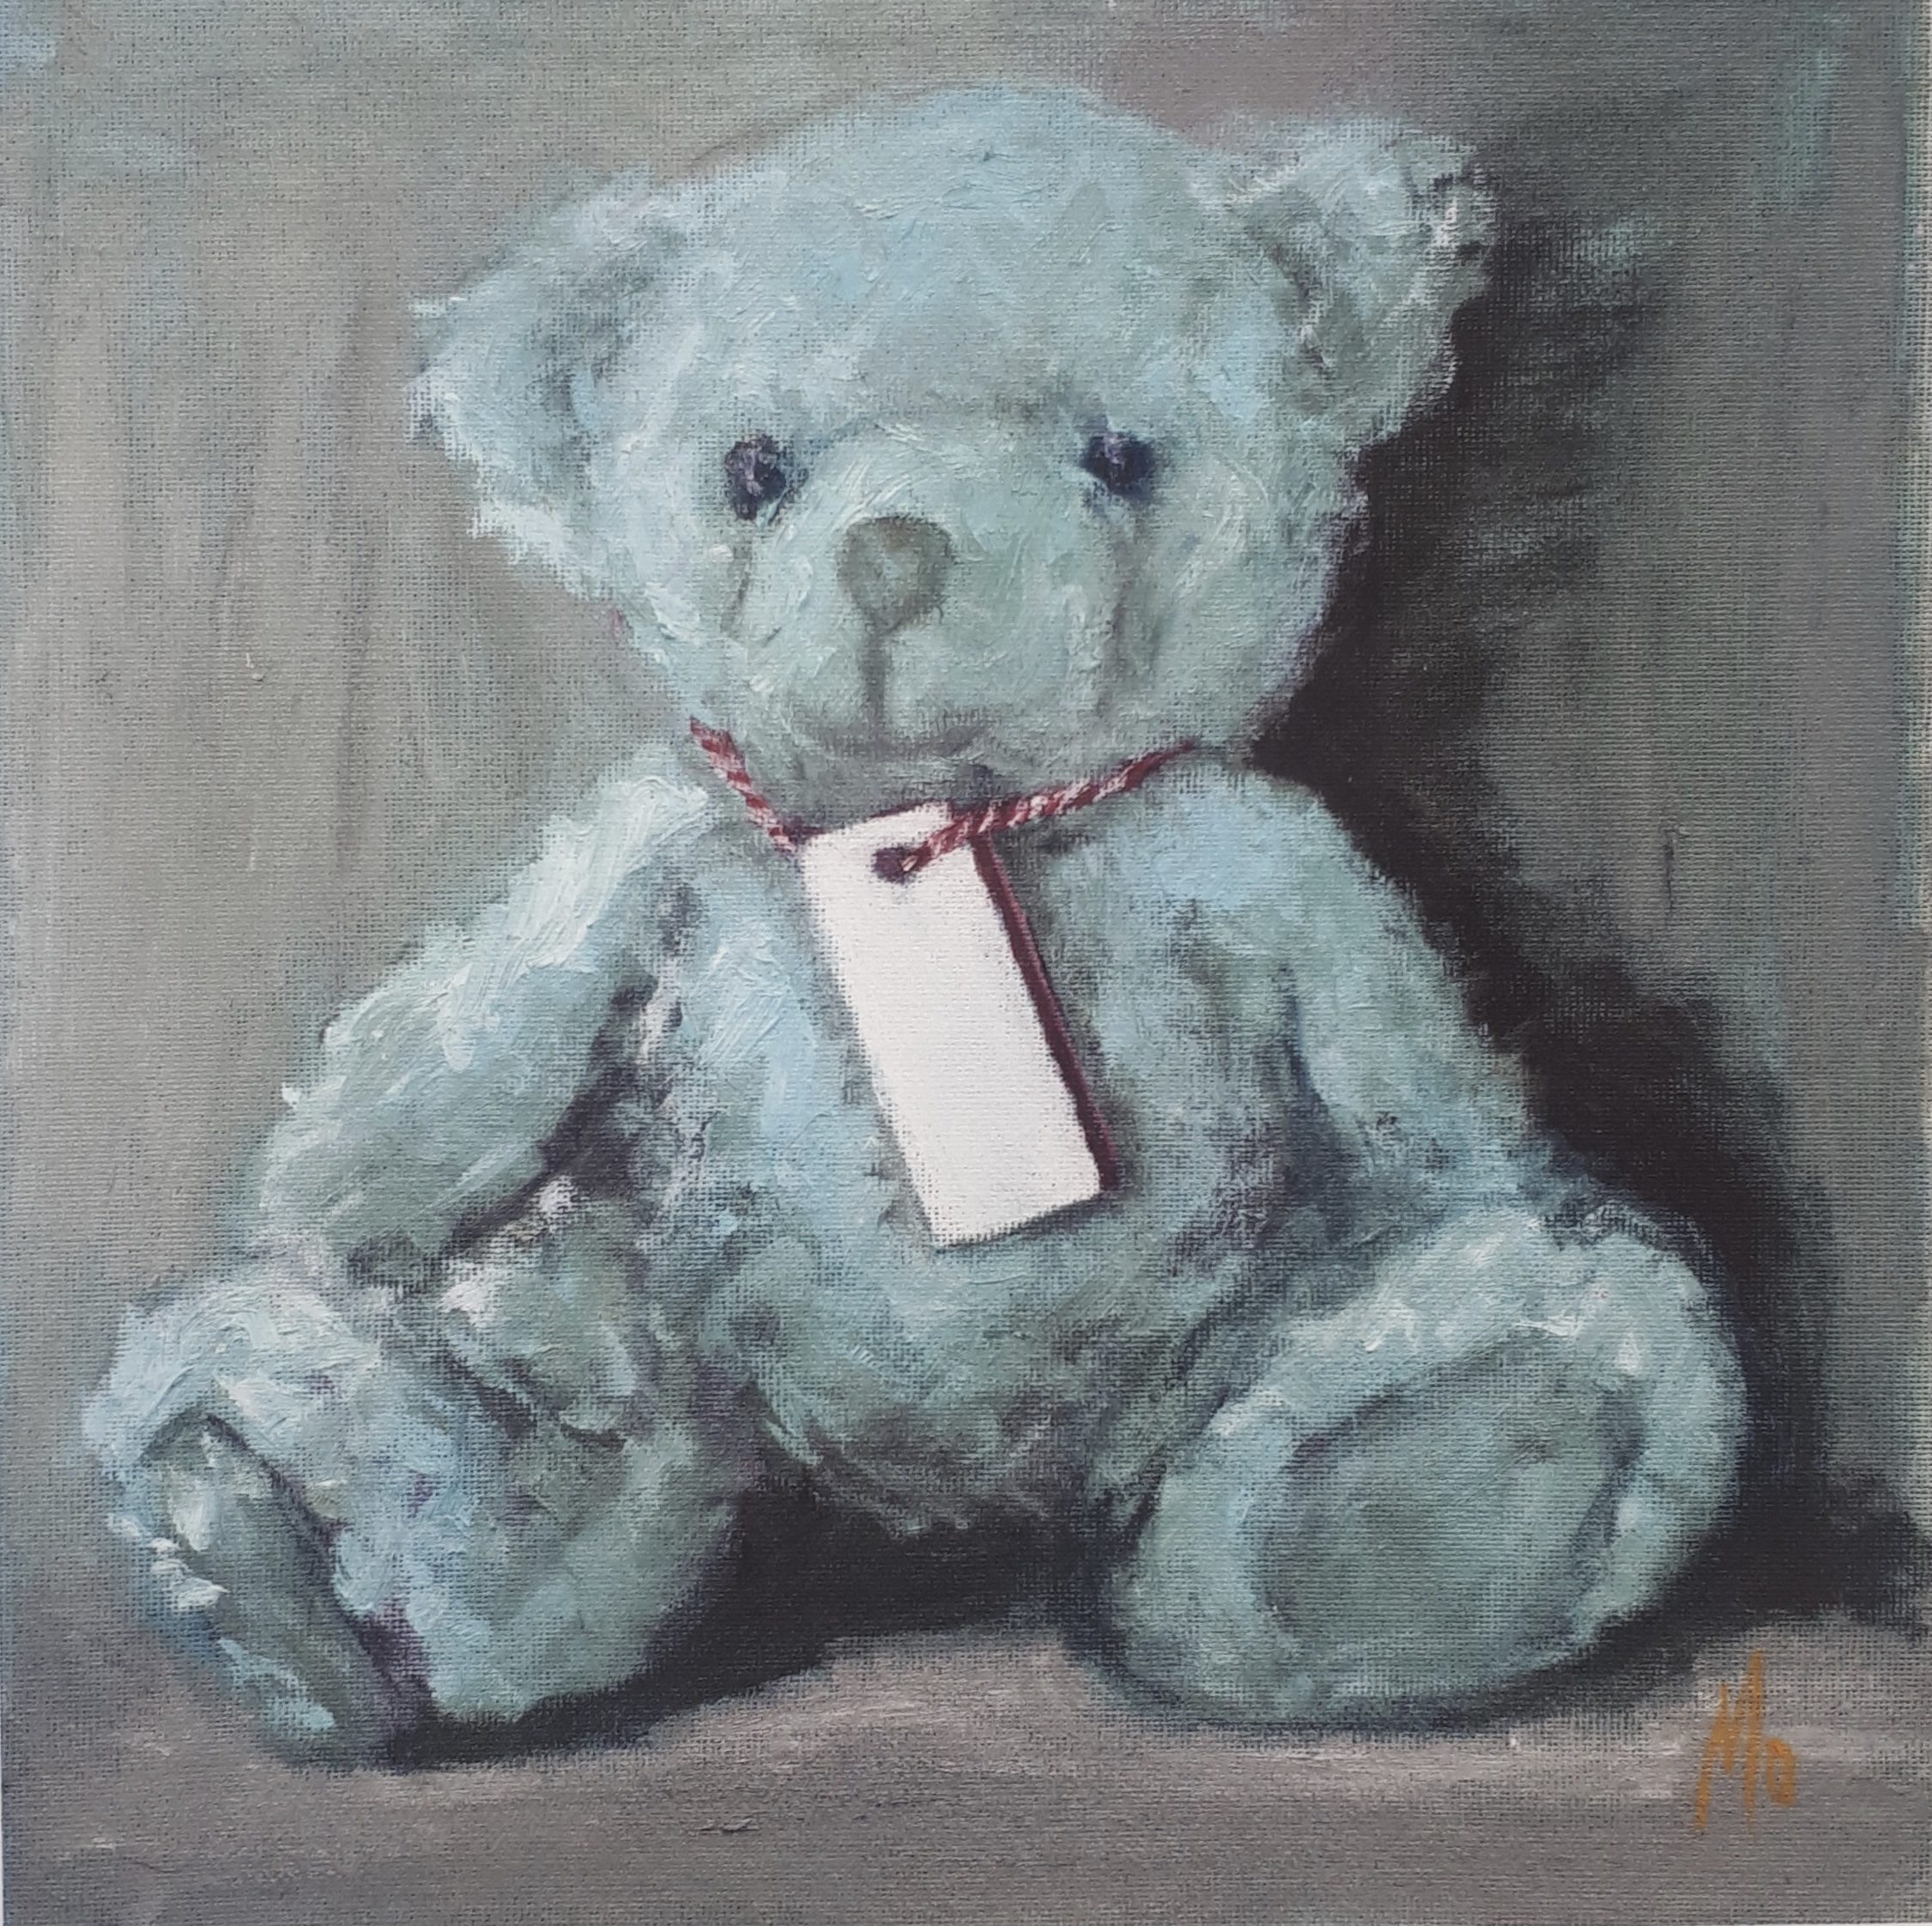 Little Blue Teddy Bear with tag around its neck